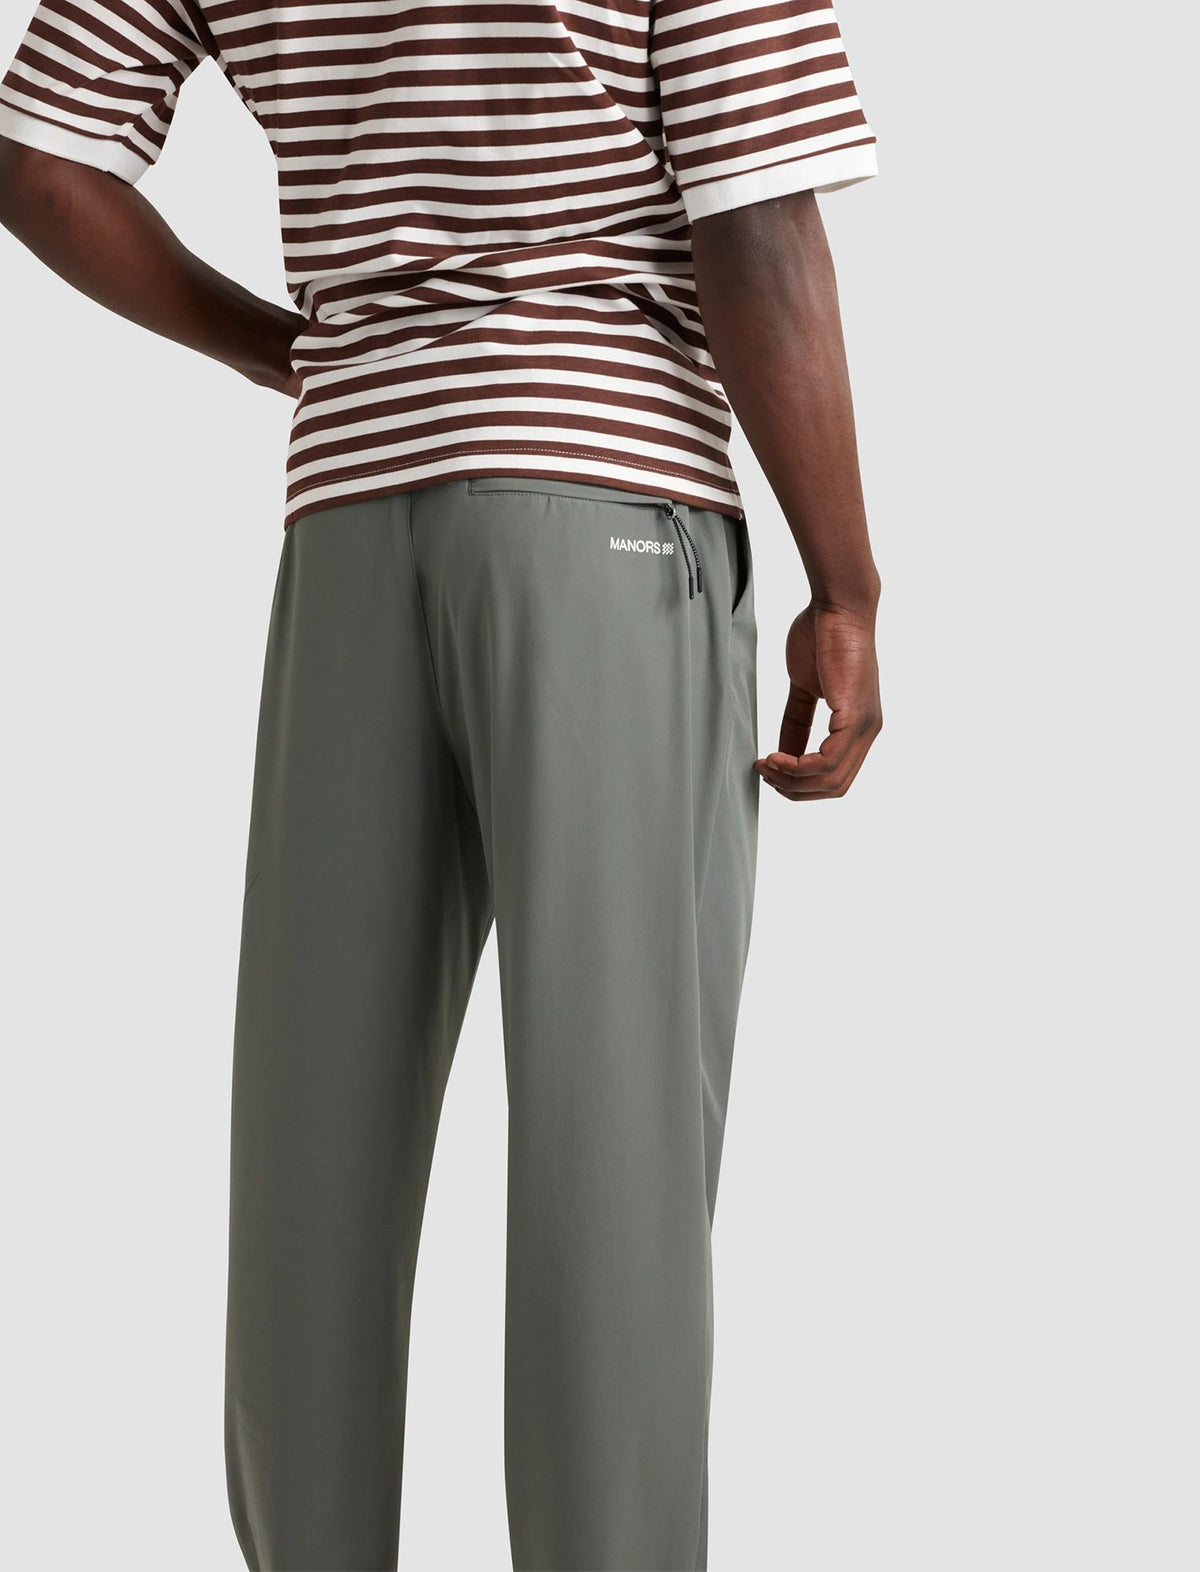 MANORS GOLF The Course Trouser in Green